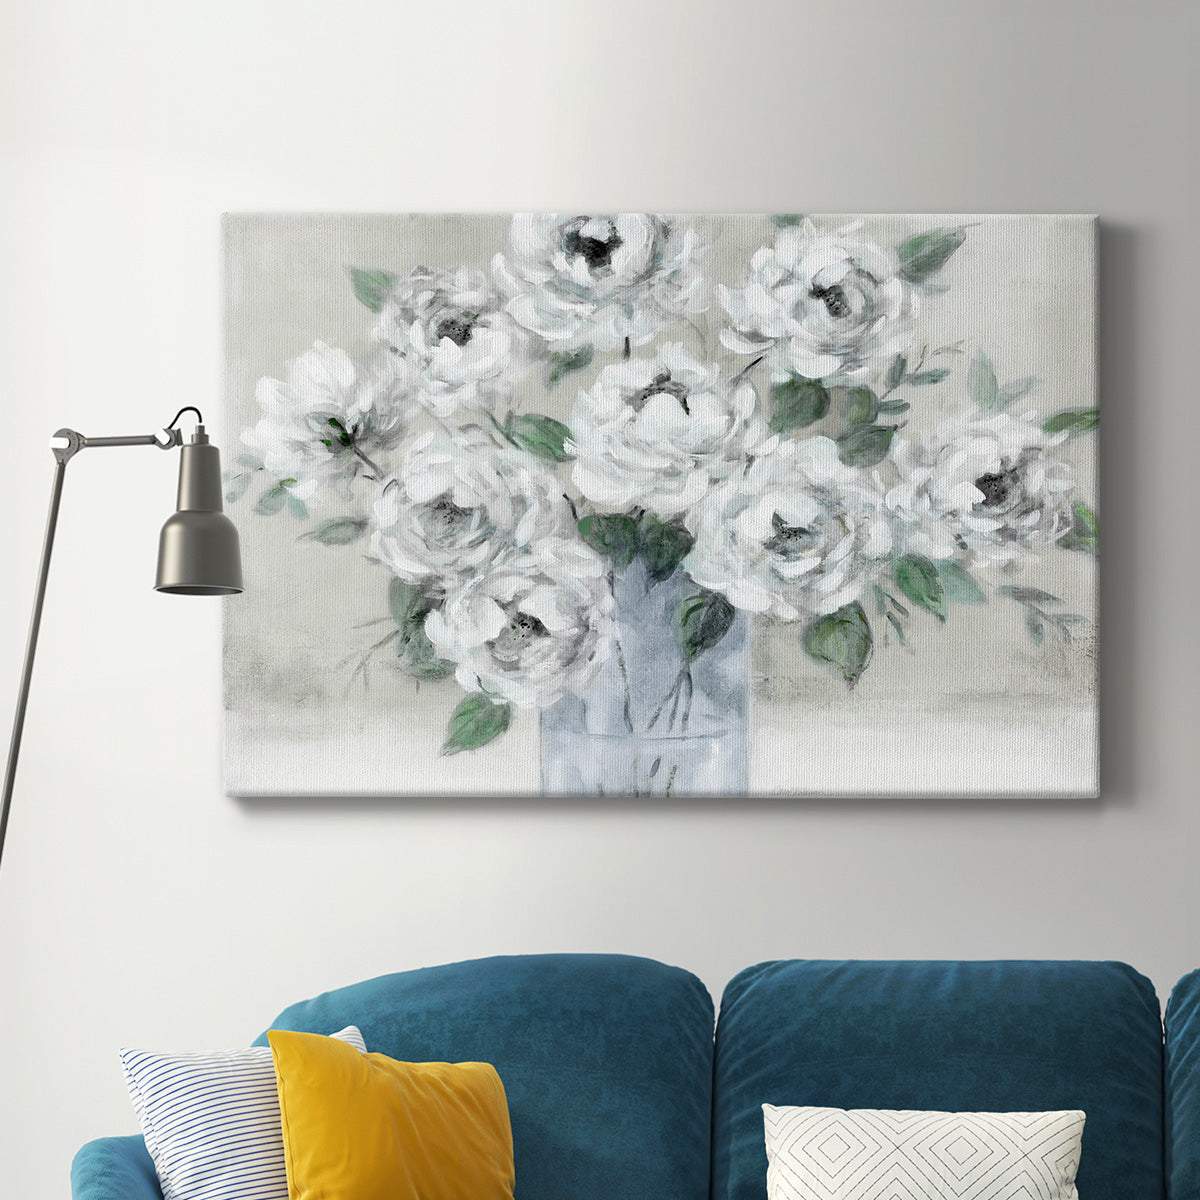 Tender White Roses Premium Gallery Wrapped Canvas - Ready to Hang